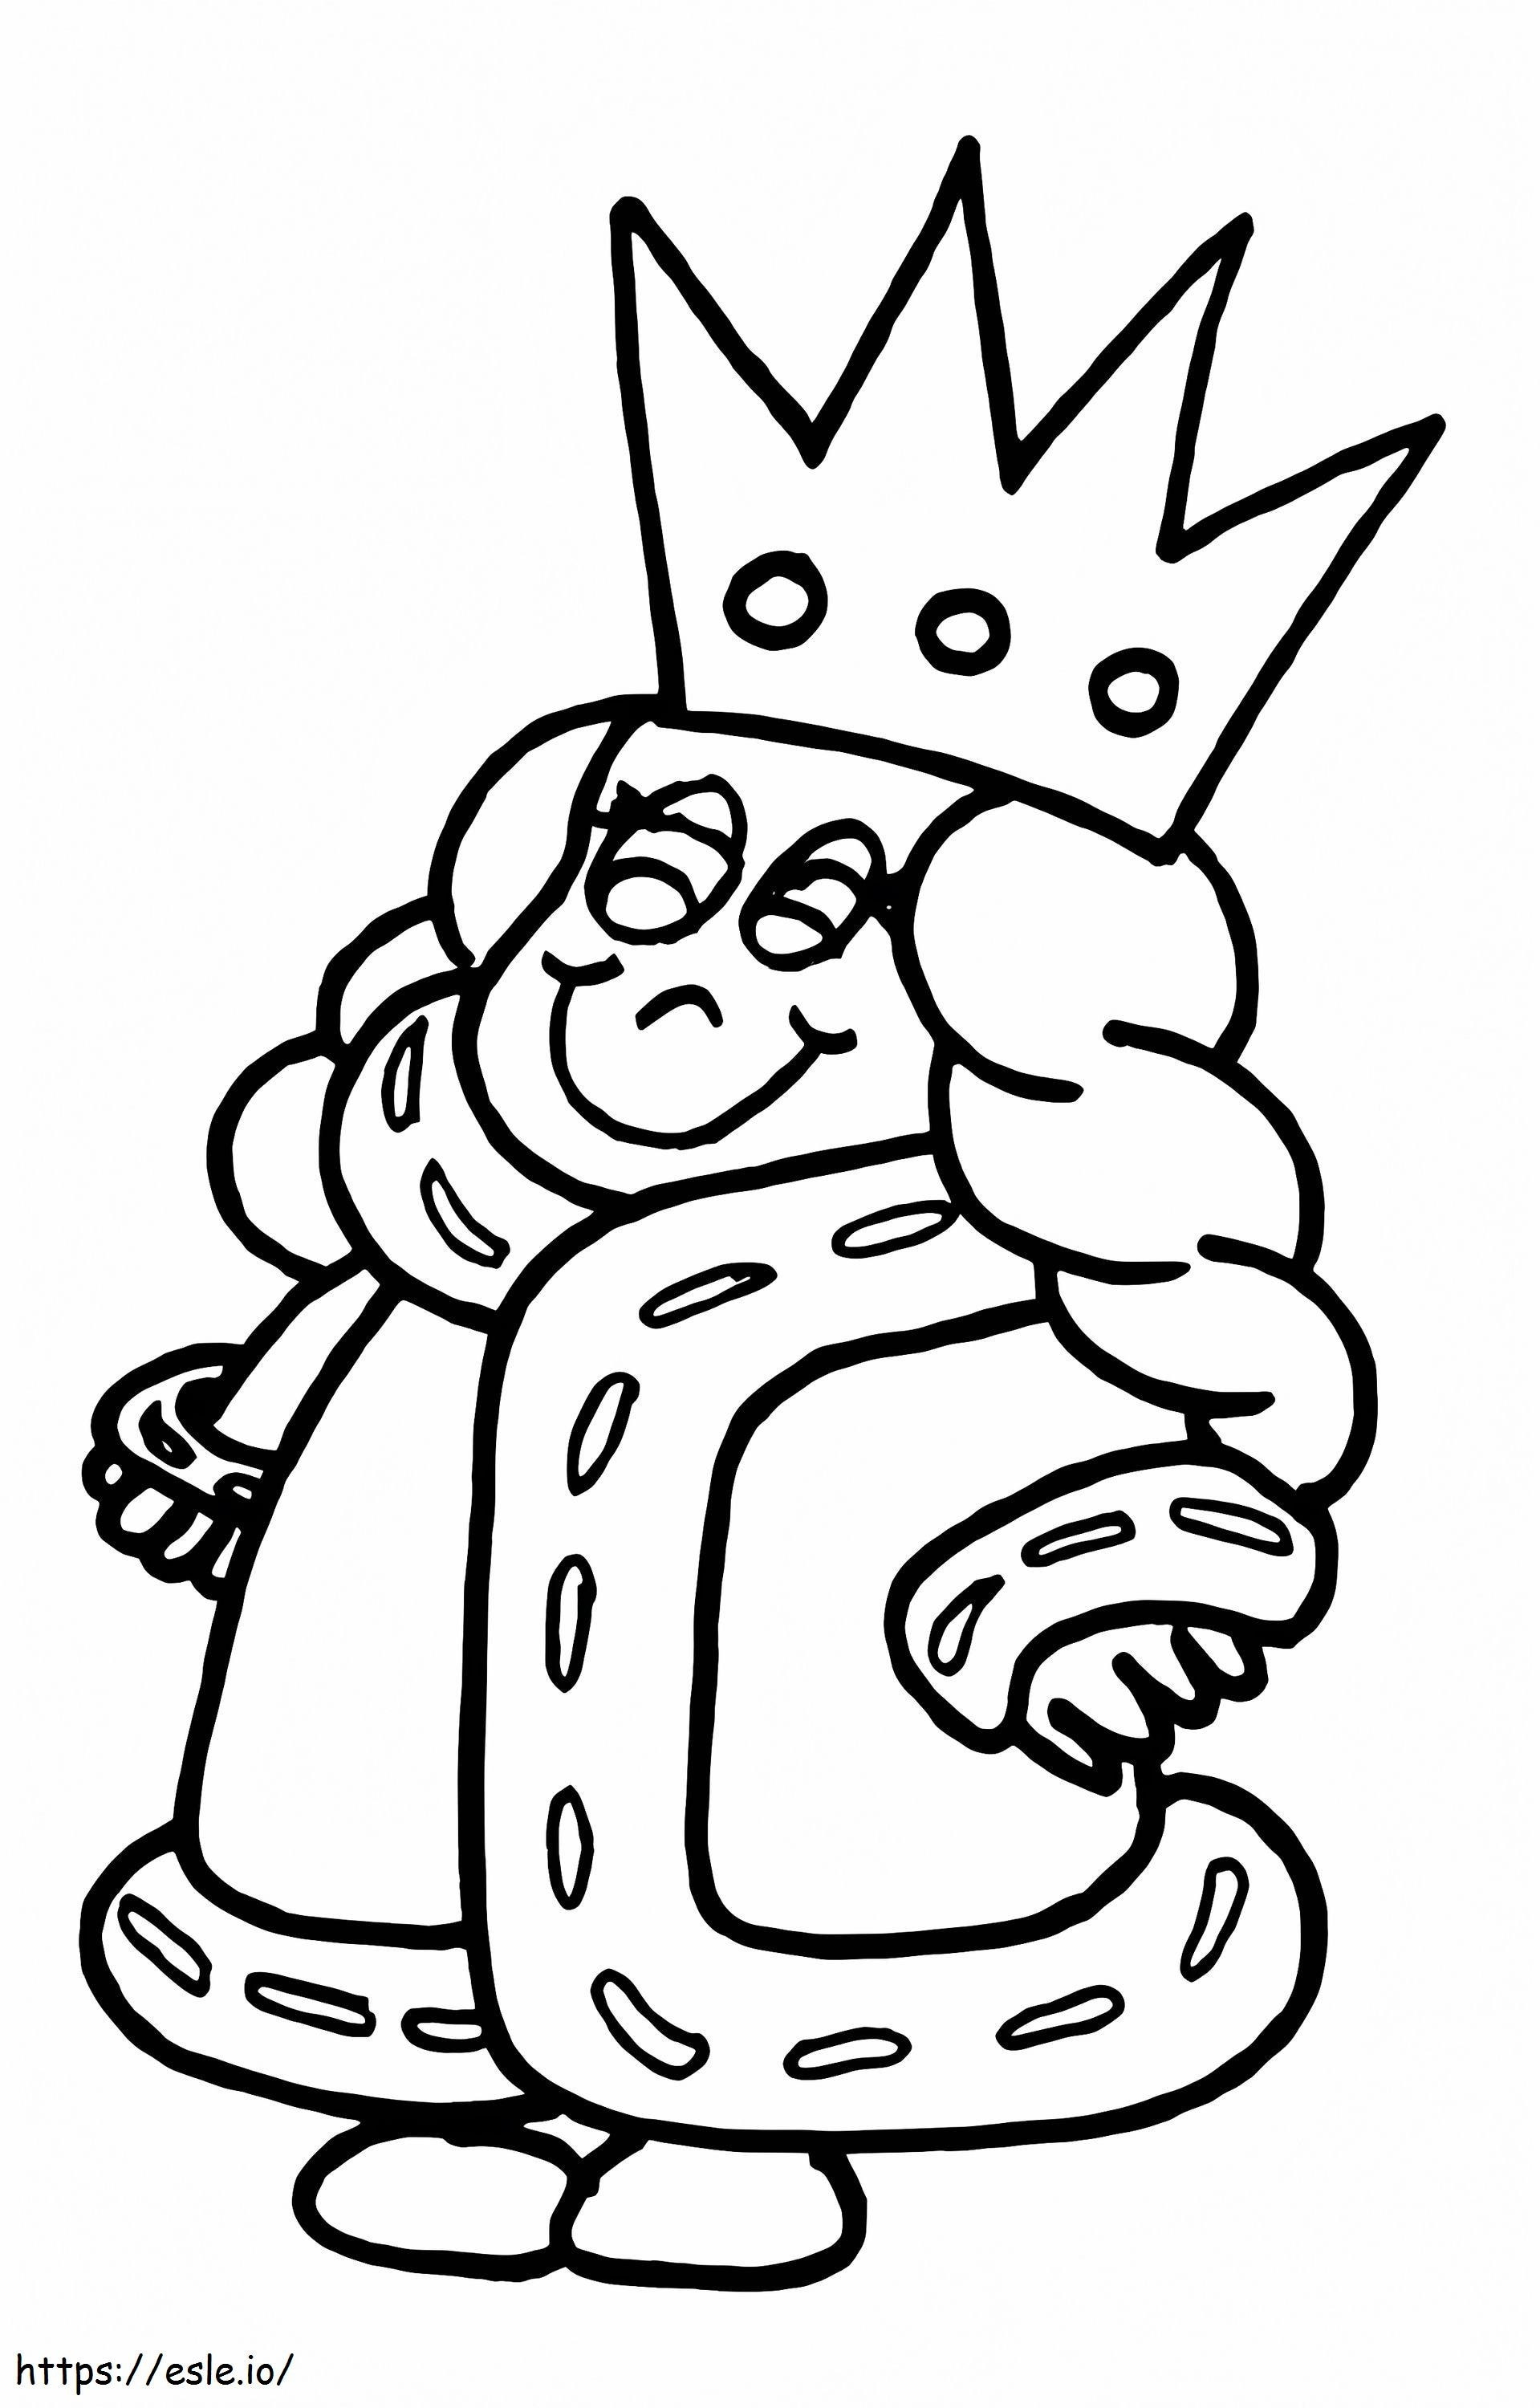 Little Queen Smiling coloring page